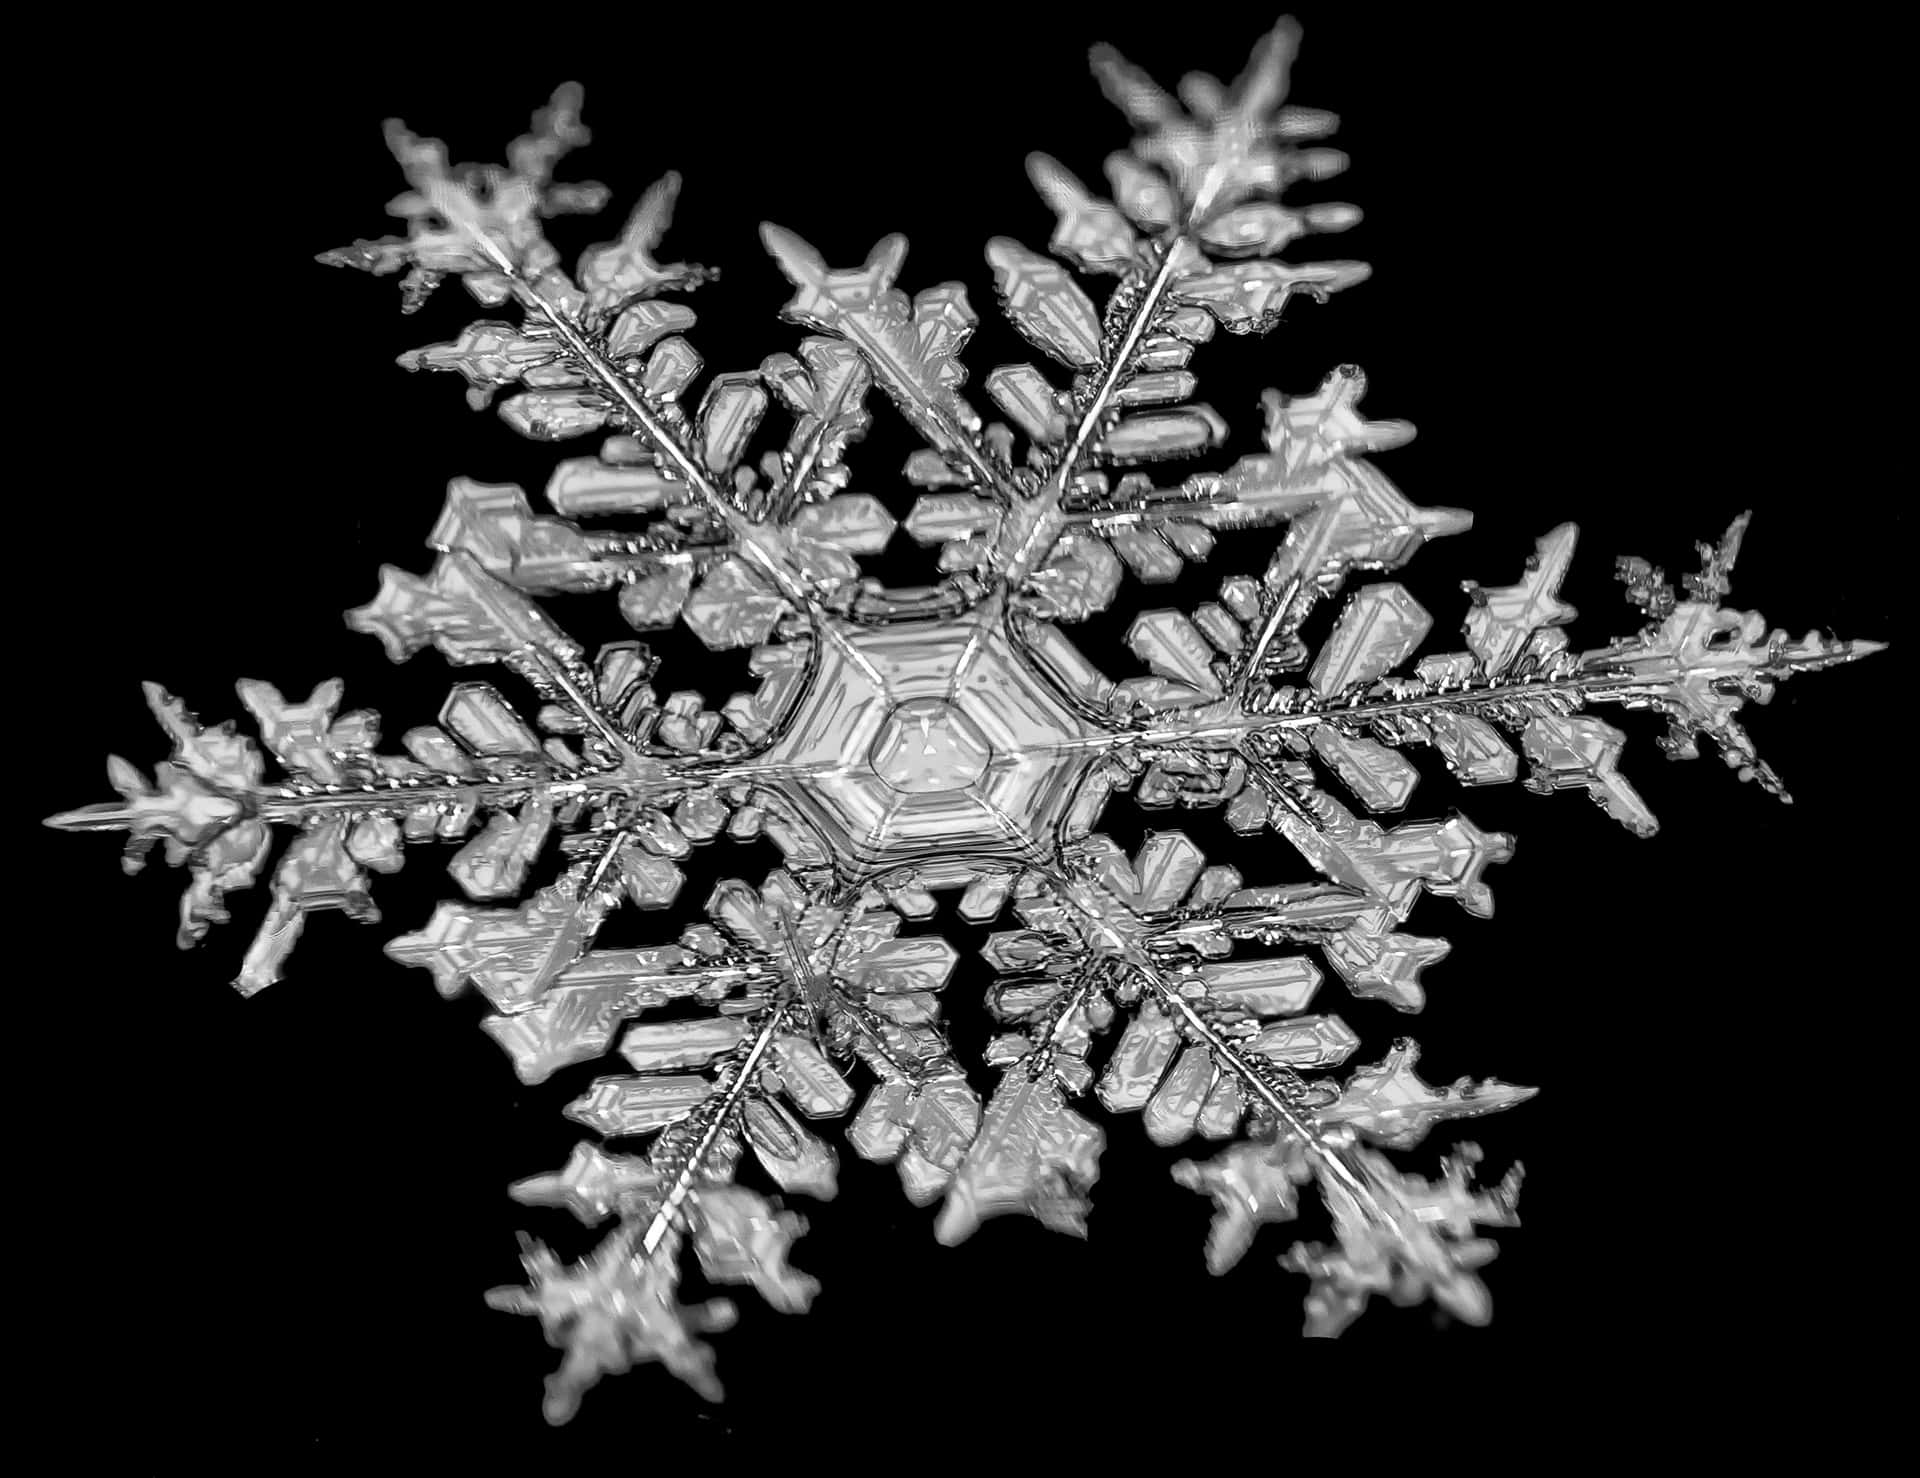 A snowflake sparkles in the light